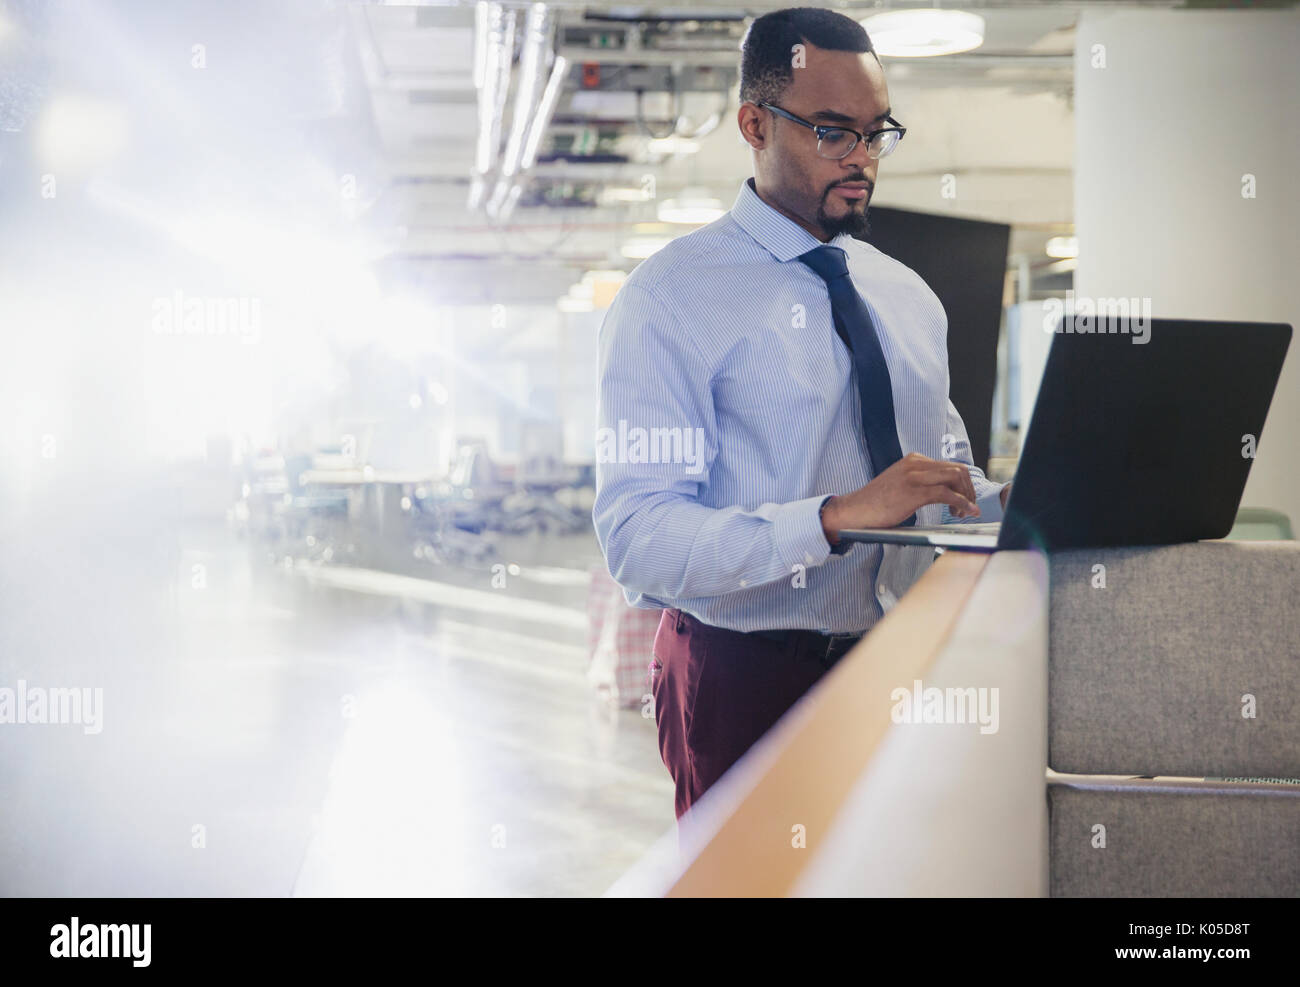 Businessman using laptop at office cubicle wall Banque D'Images